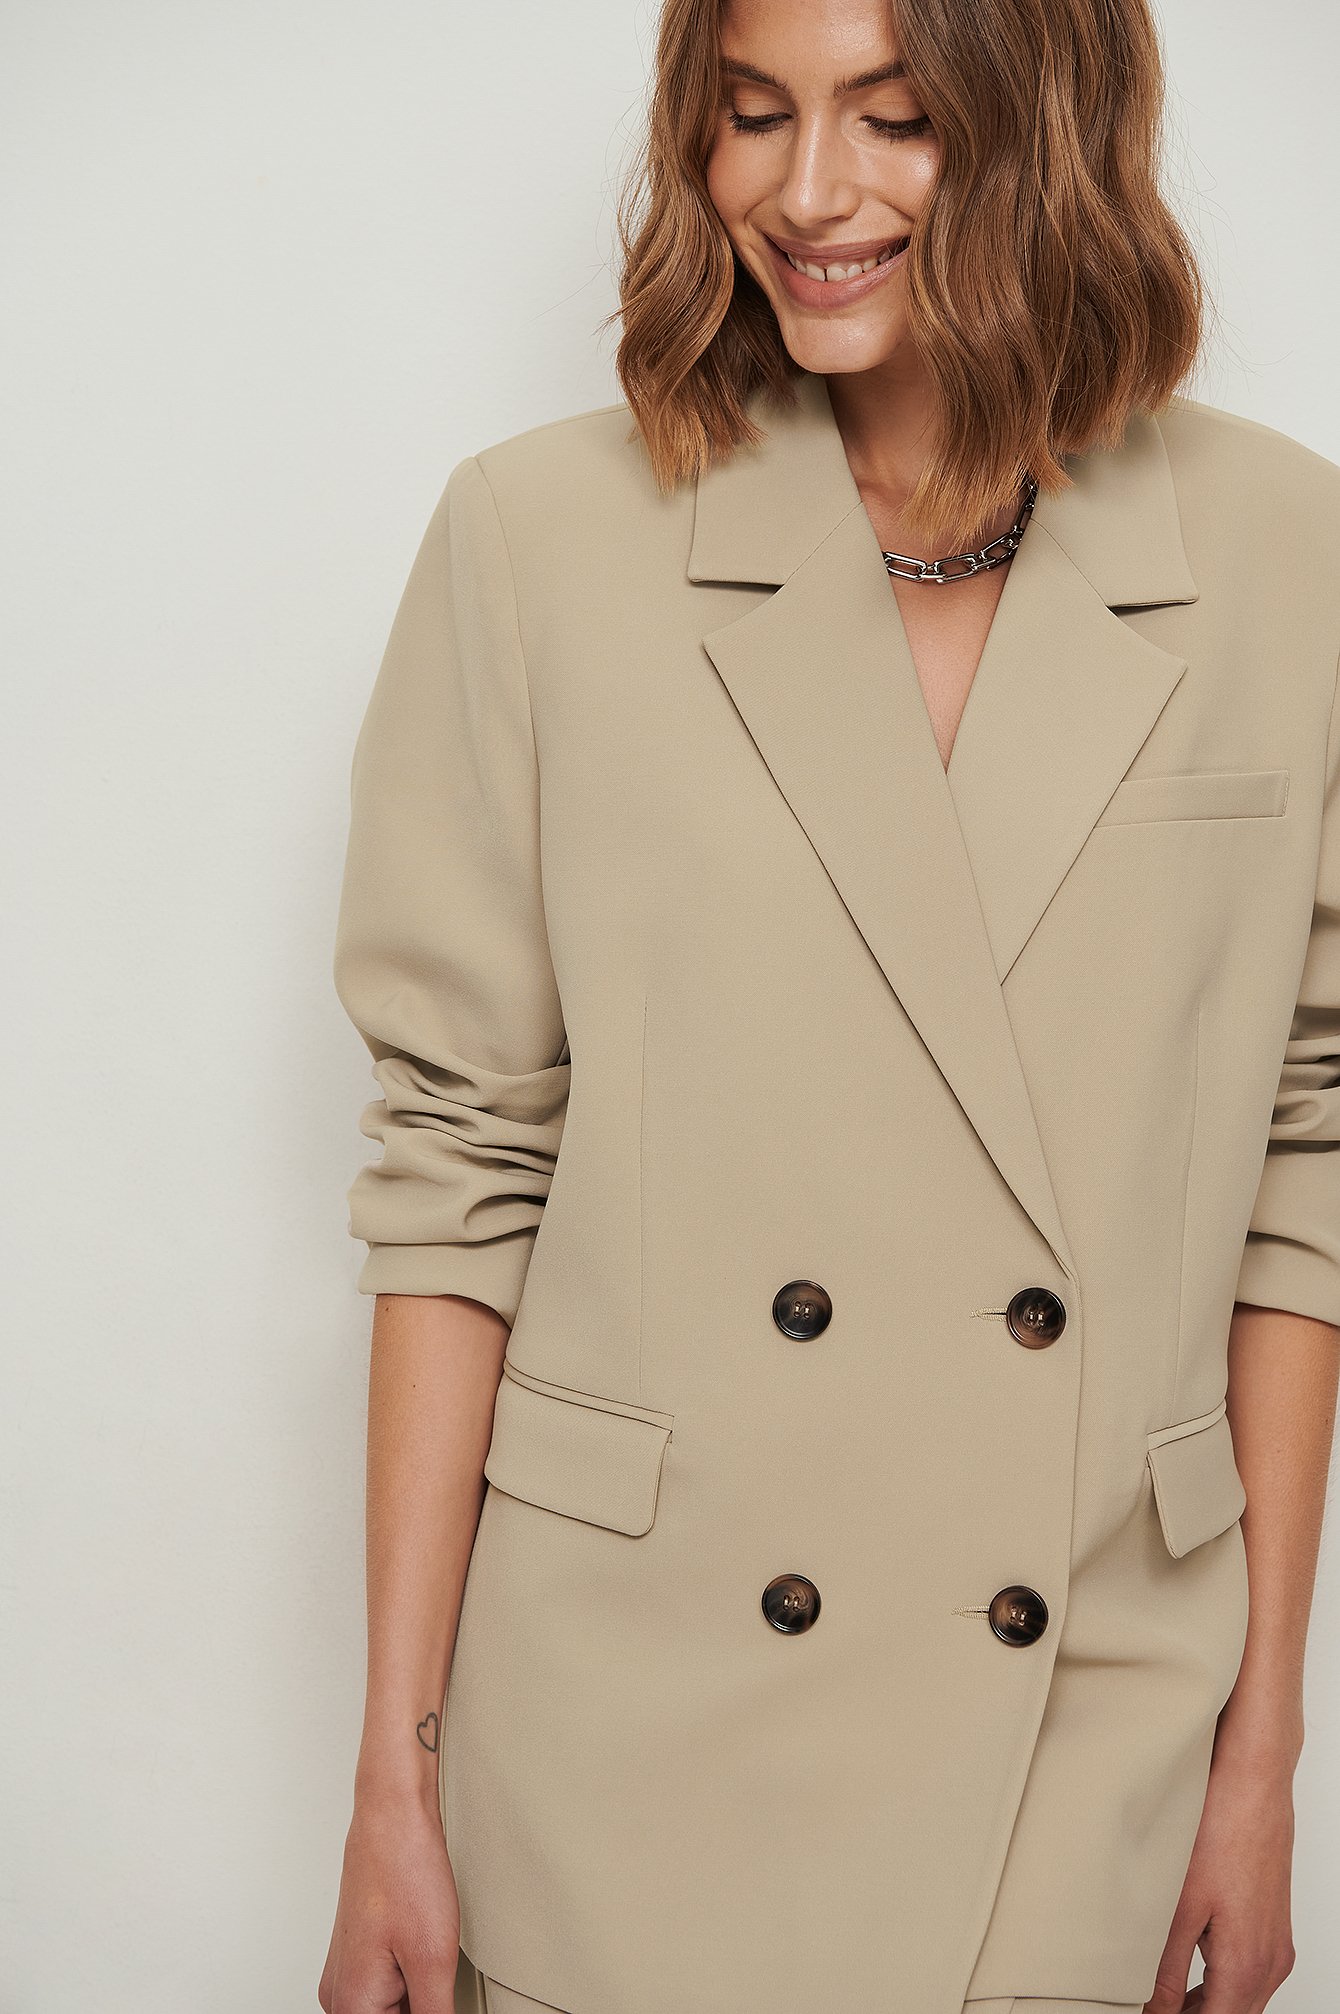 Small Zara 100% Linen Oversized Double Breasted Blazer in Sand Size S